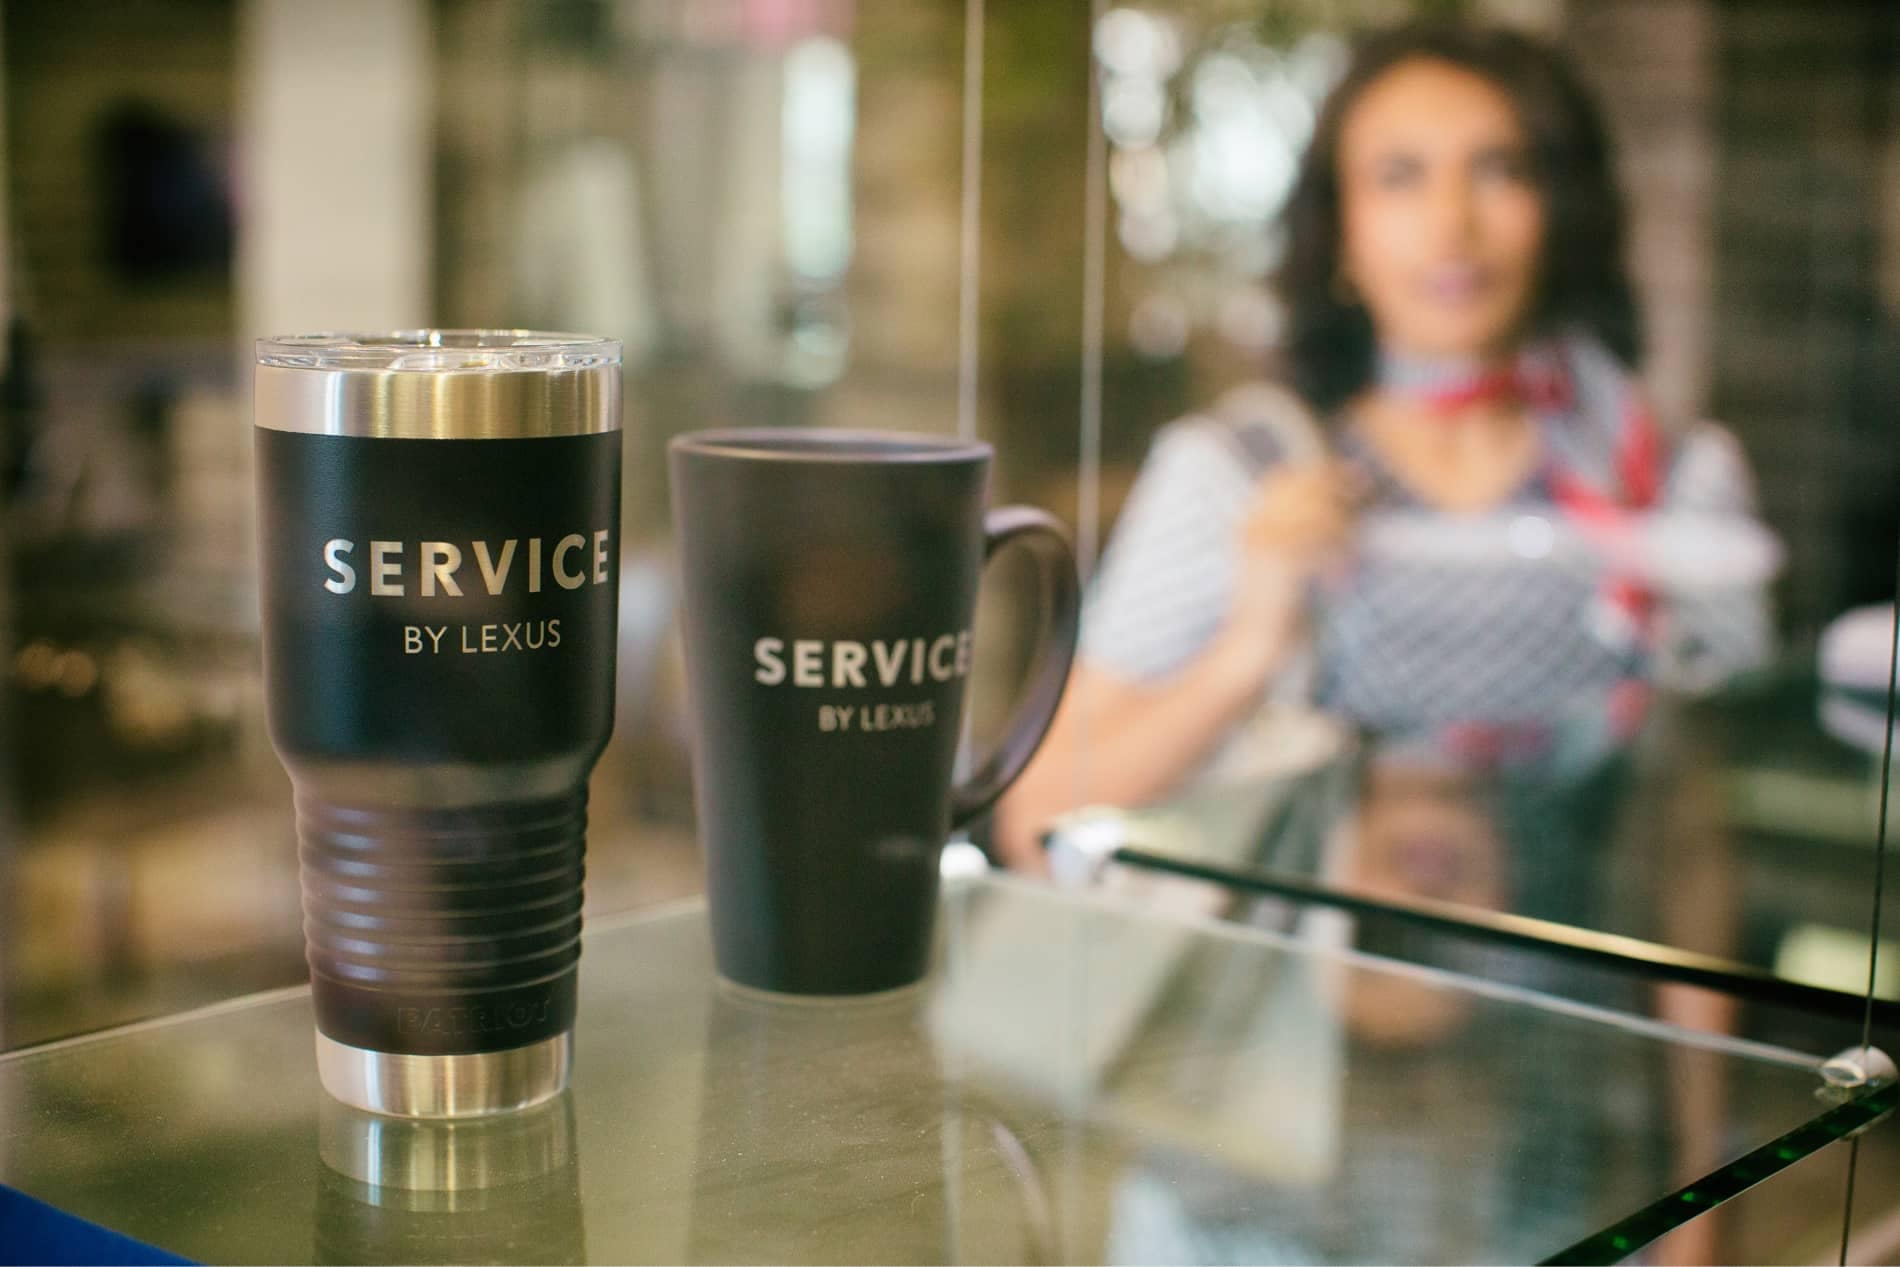 Service by Lexus coffee mug and thermos